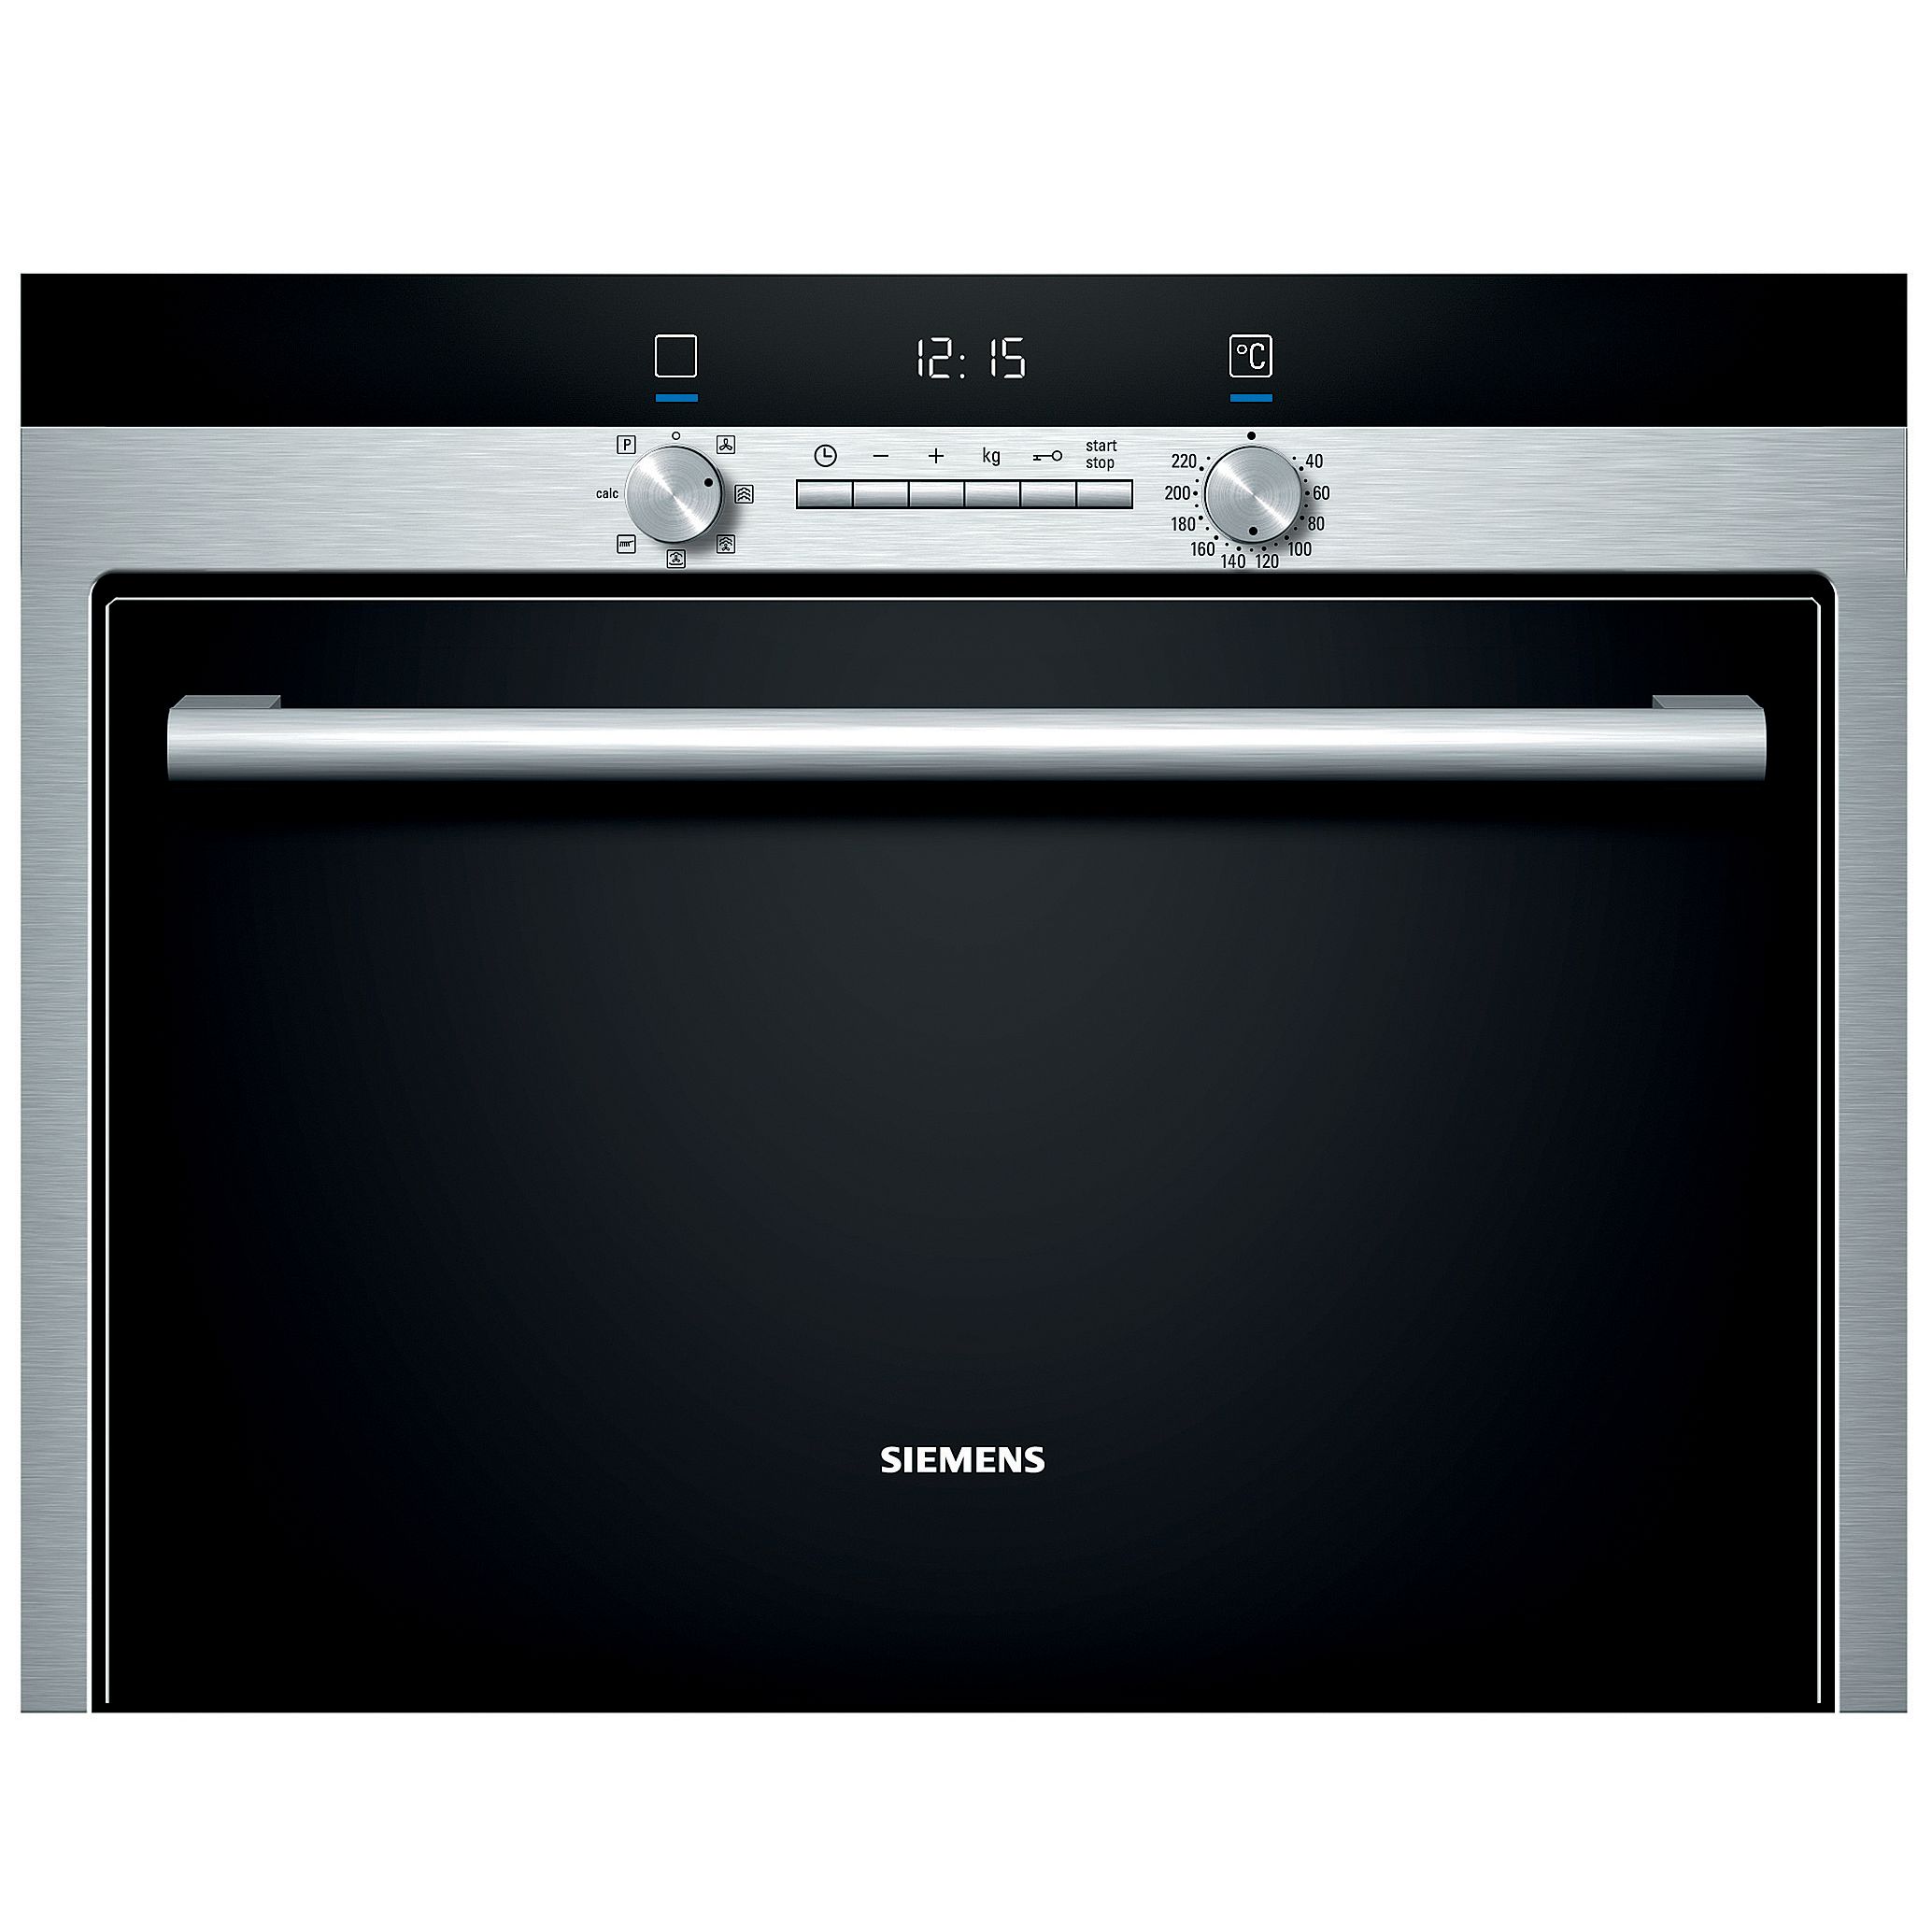 Siemens HB34D552B Compact Steam Oven, Stainless Steel at JohnLewis